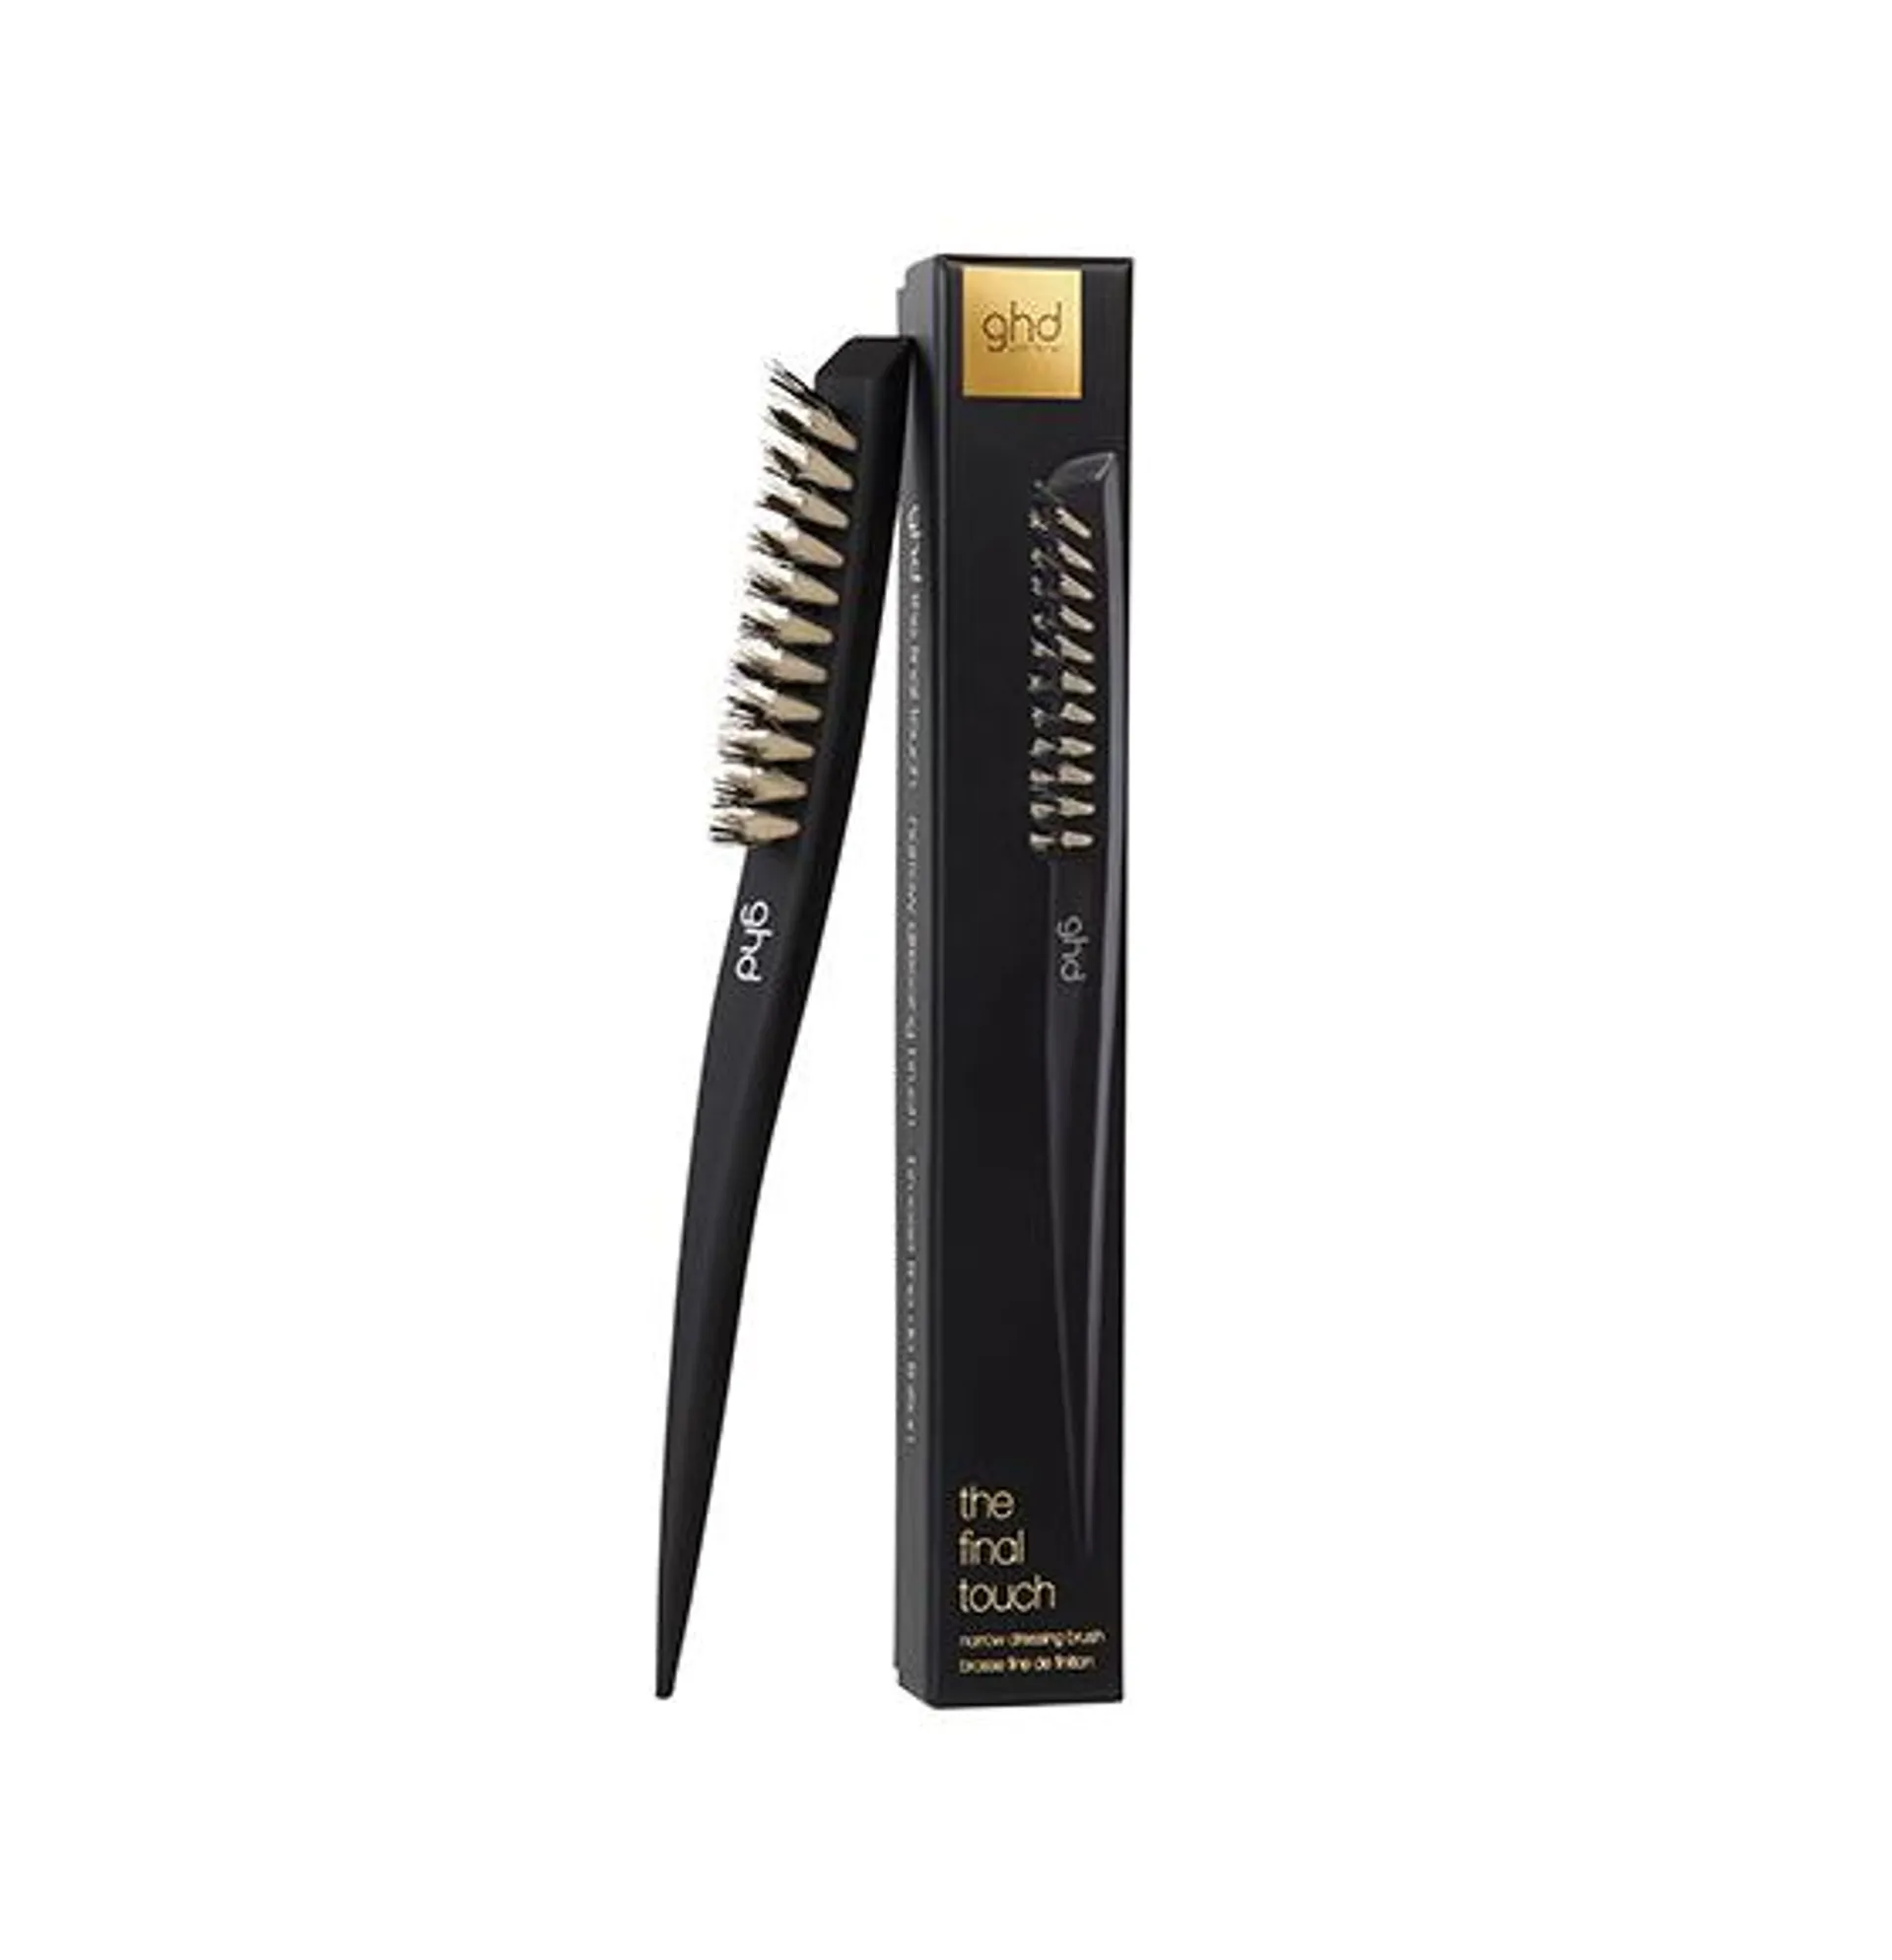 ghd The Final Touch Brush